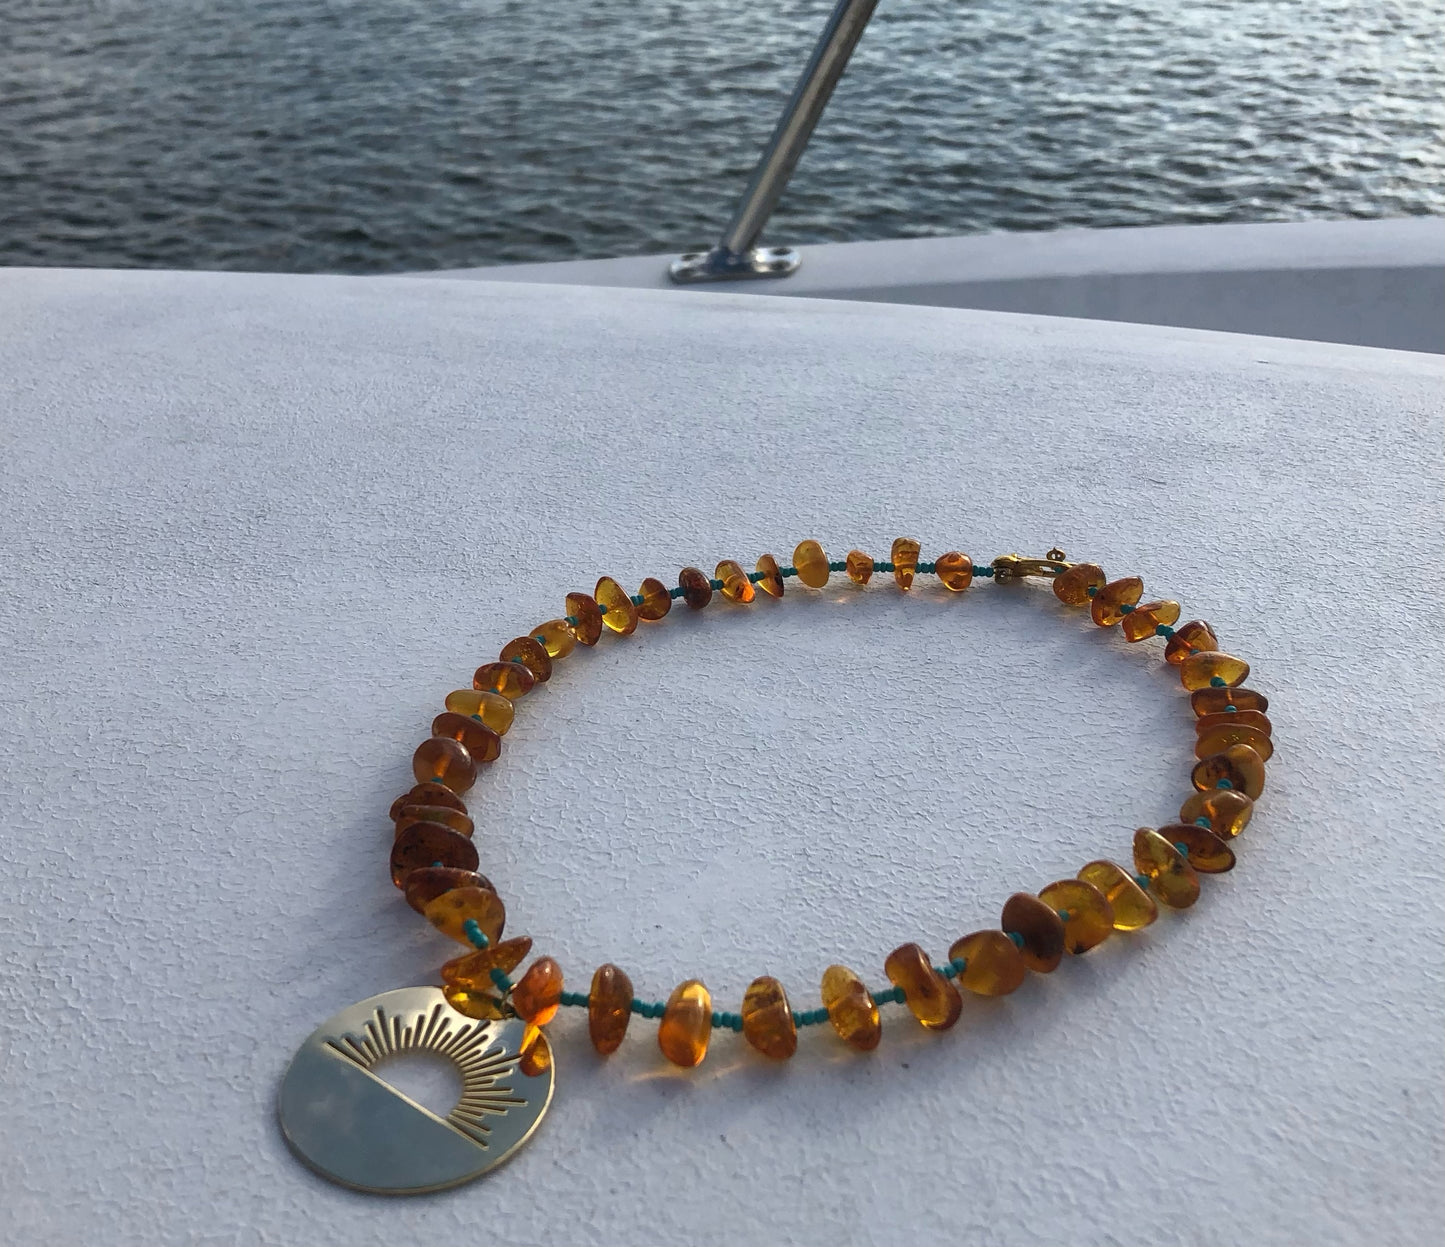 Sunrise Pendant Strung w/ Natural Amber & Turquoise Glass Seed Beads